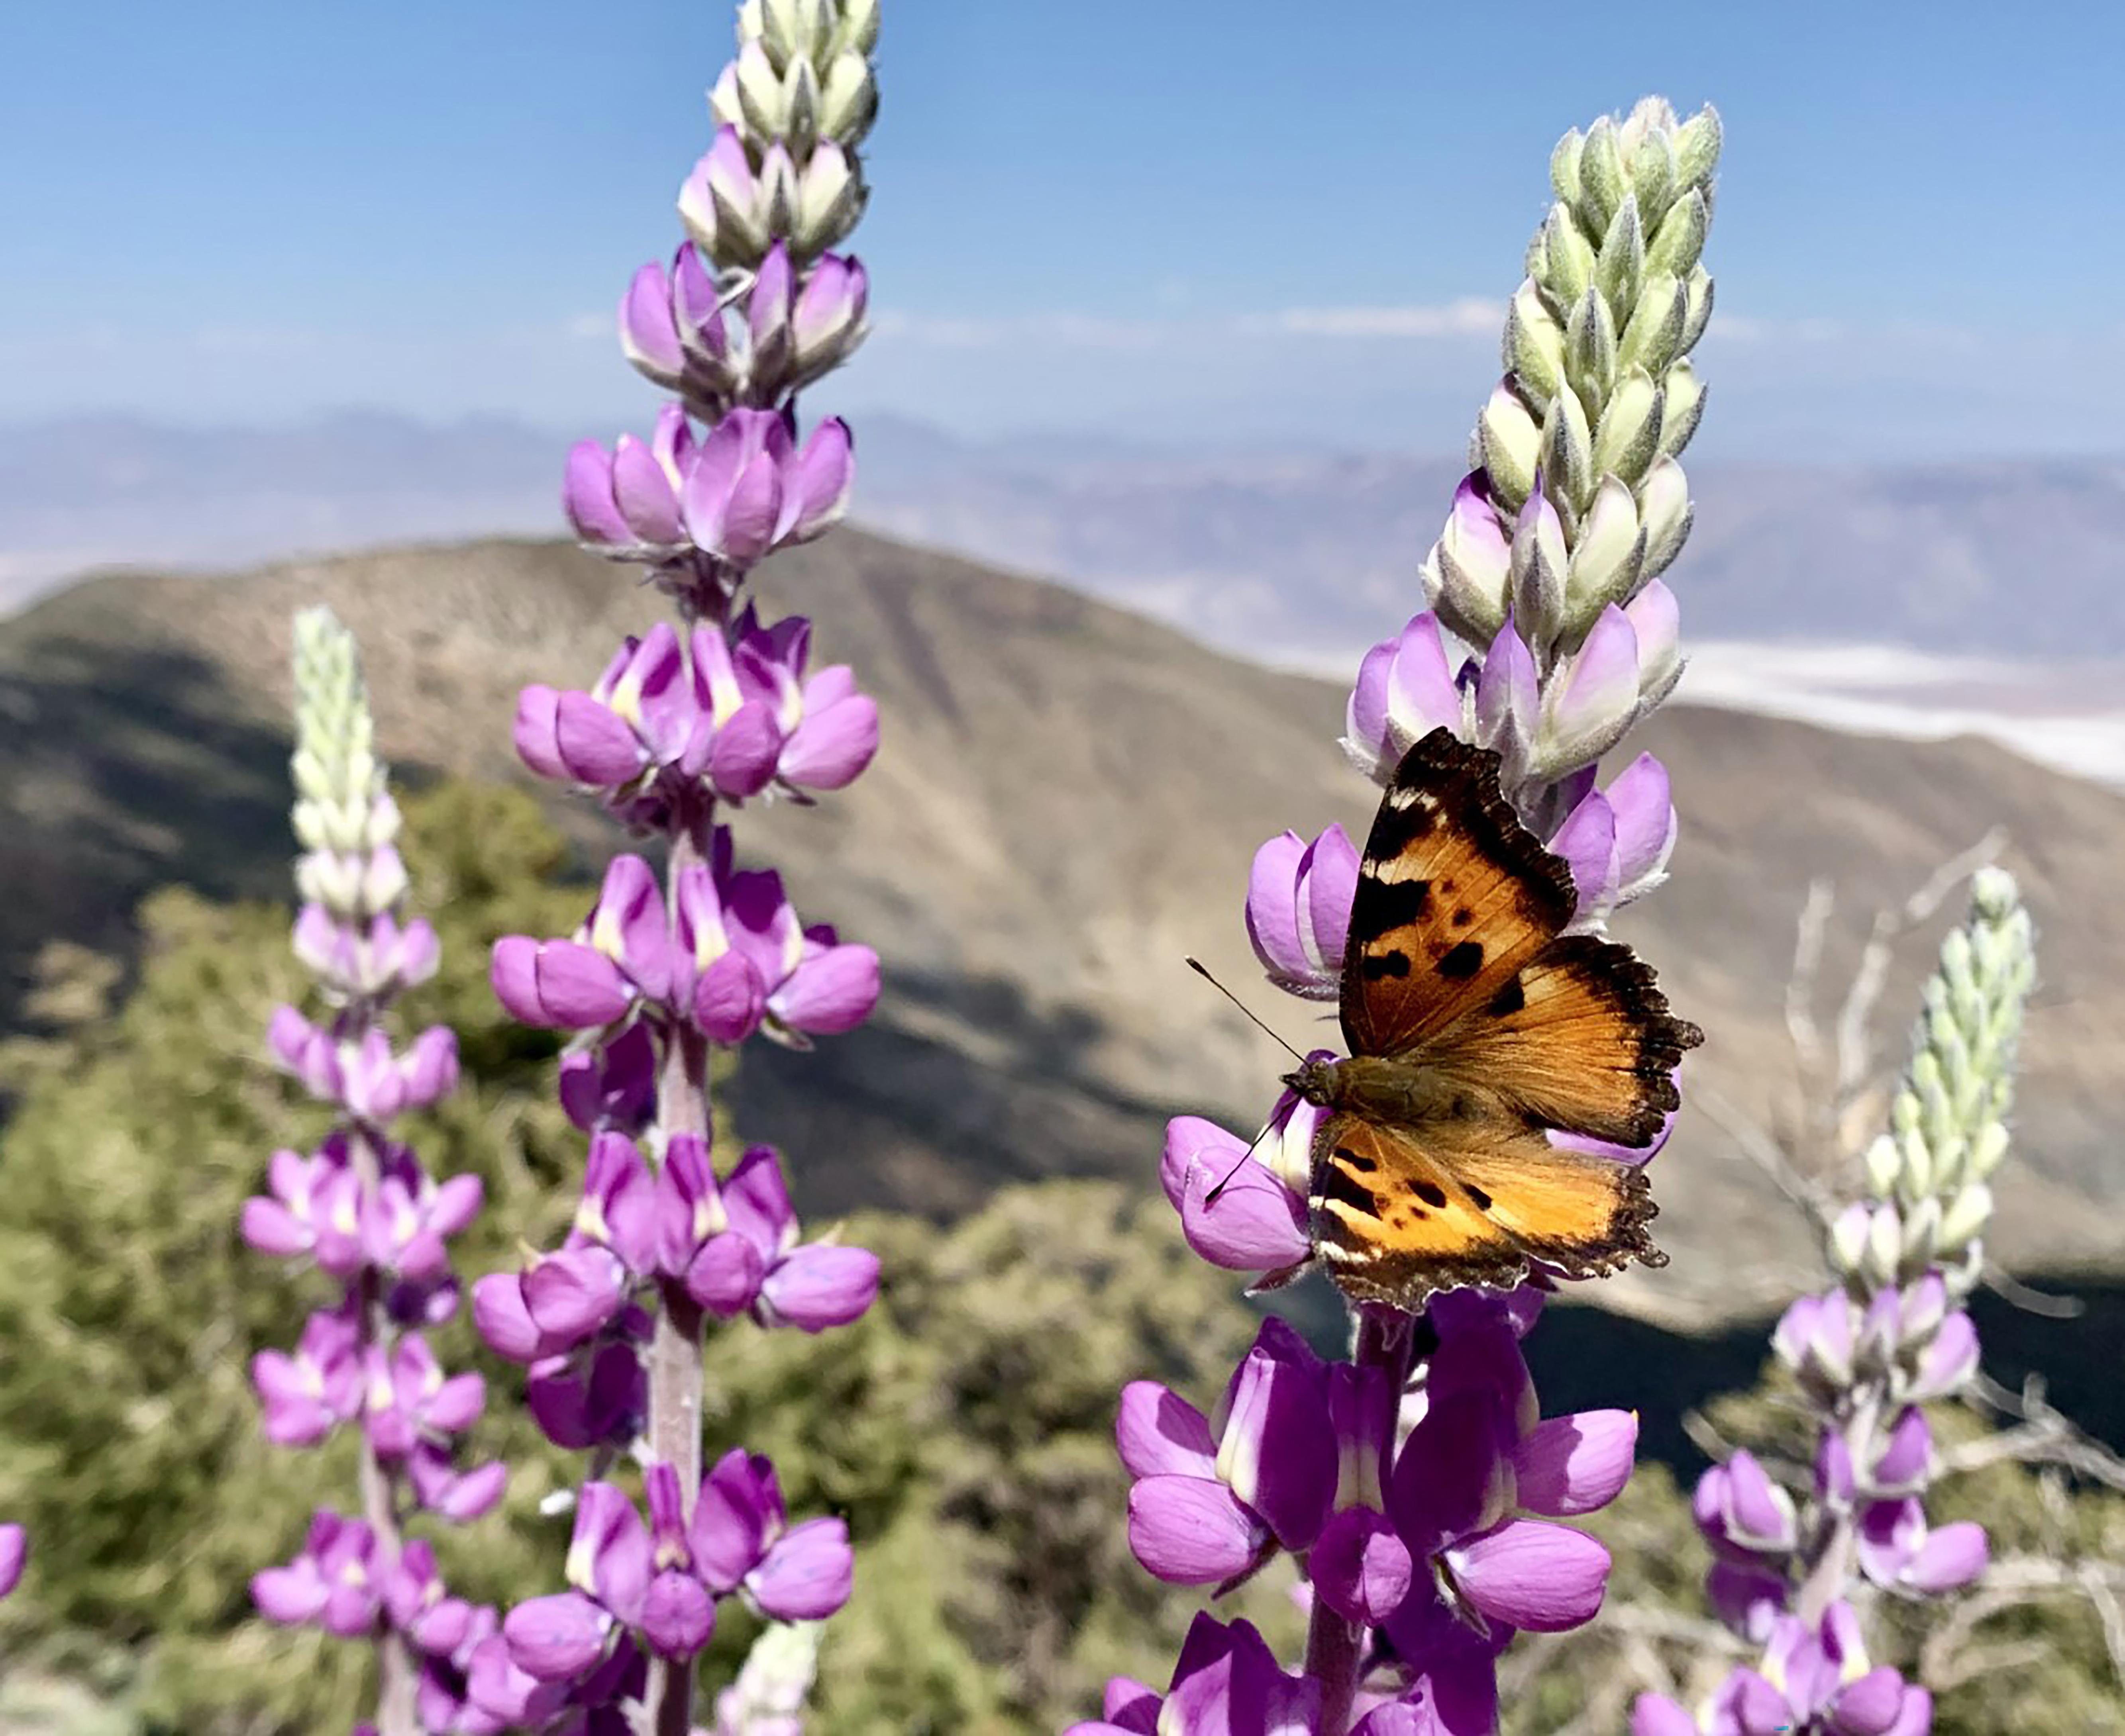 pink lupine flowers with an orange and black butterfly